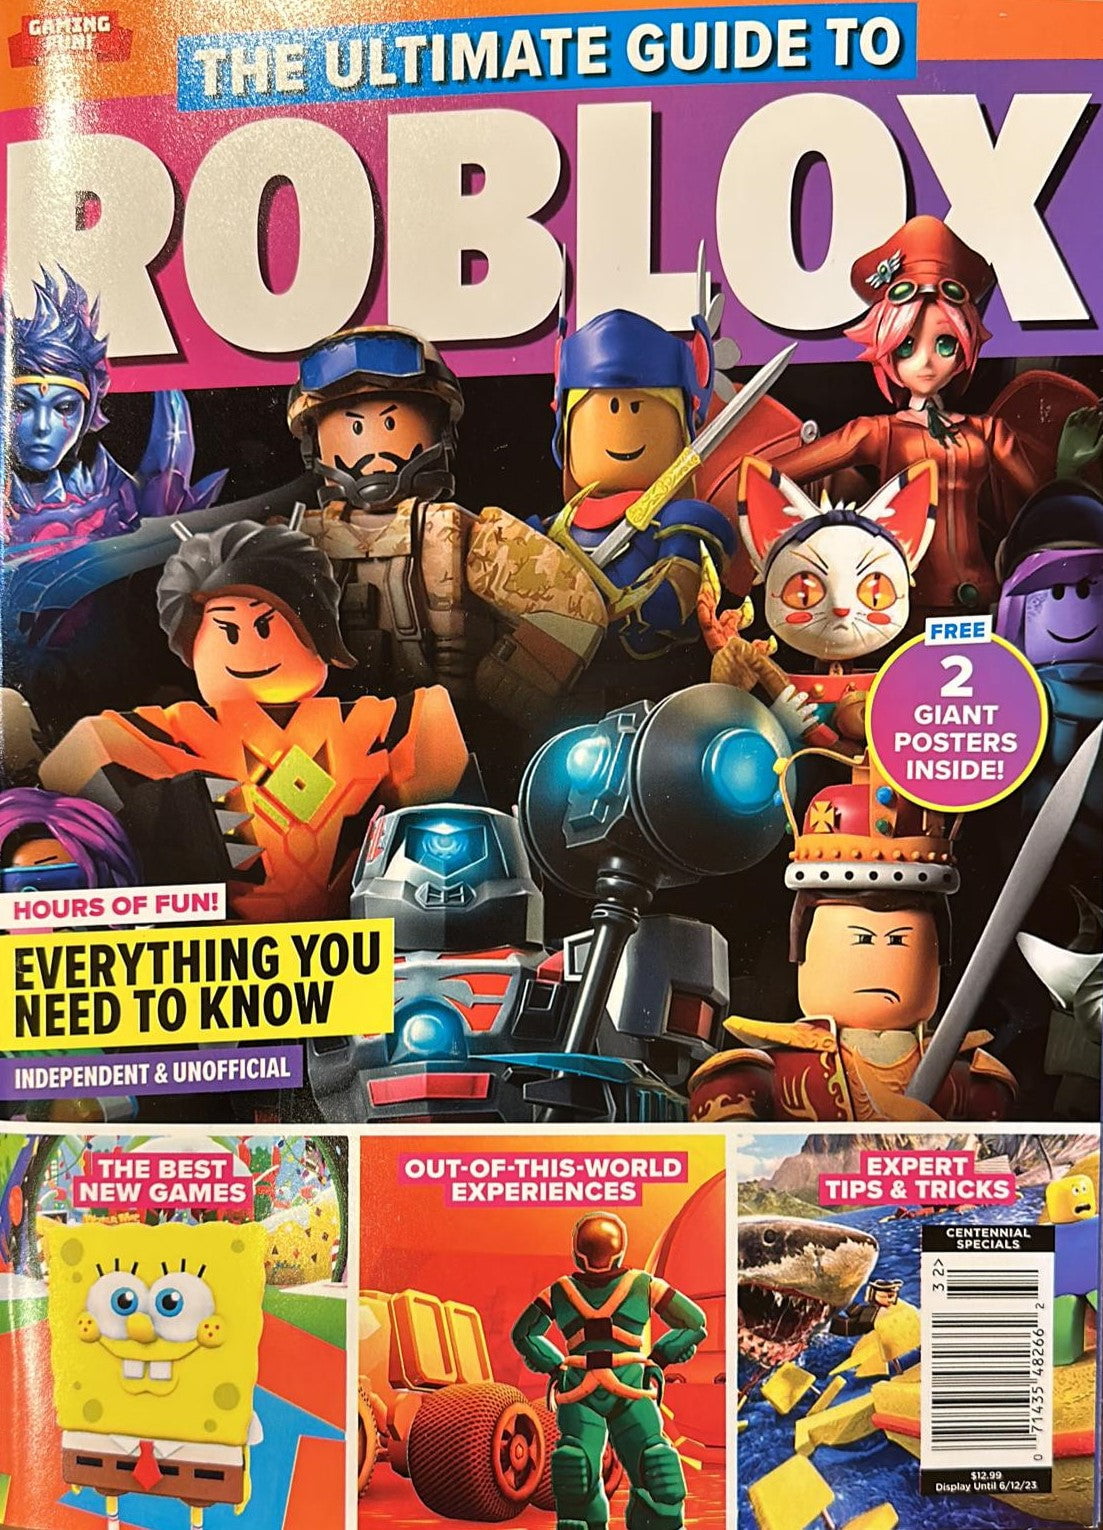 Roblox Promo Codes Guide: Discover The Ultimate Guide To Roblox Promo Codes  on Apple Books